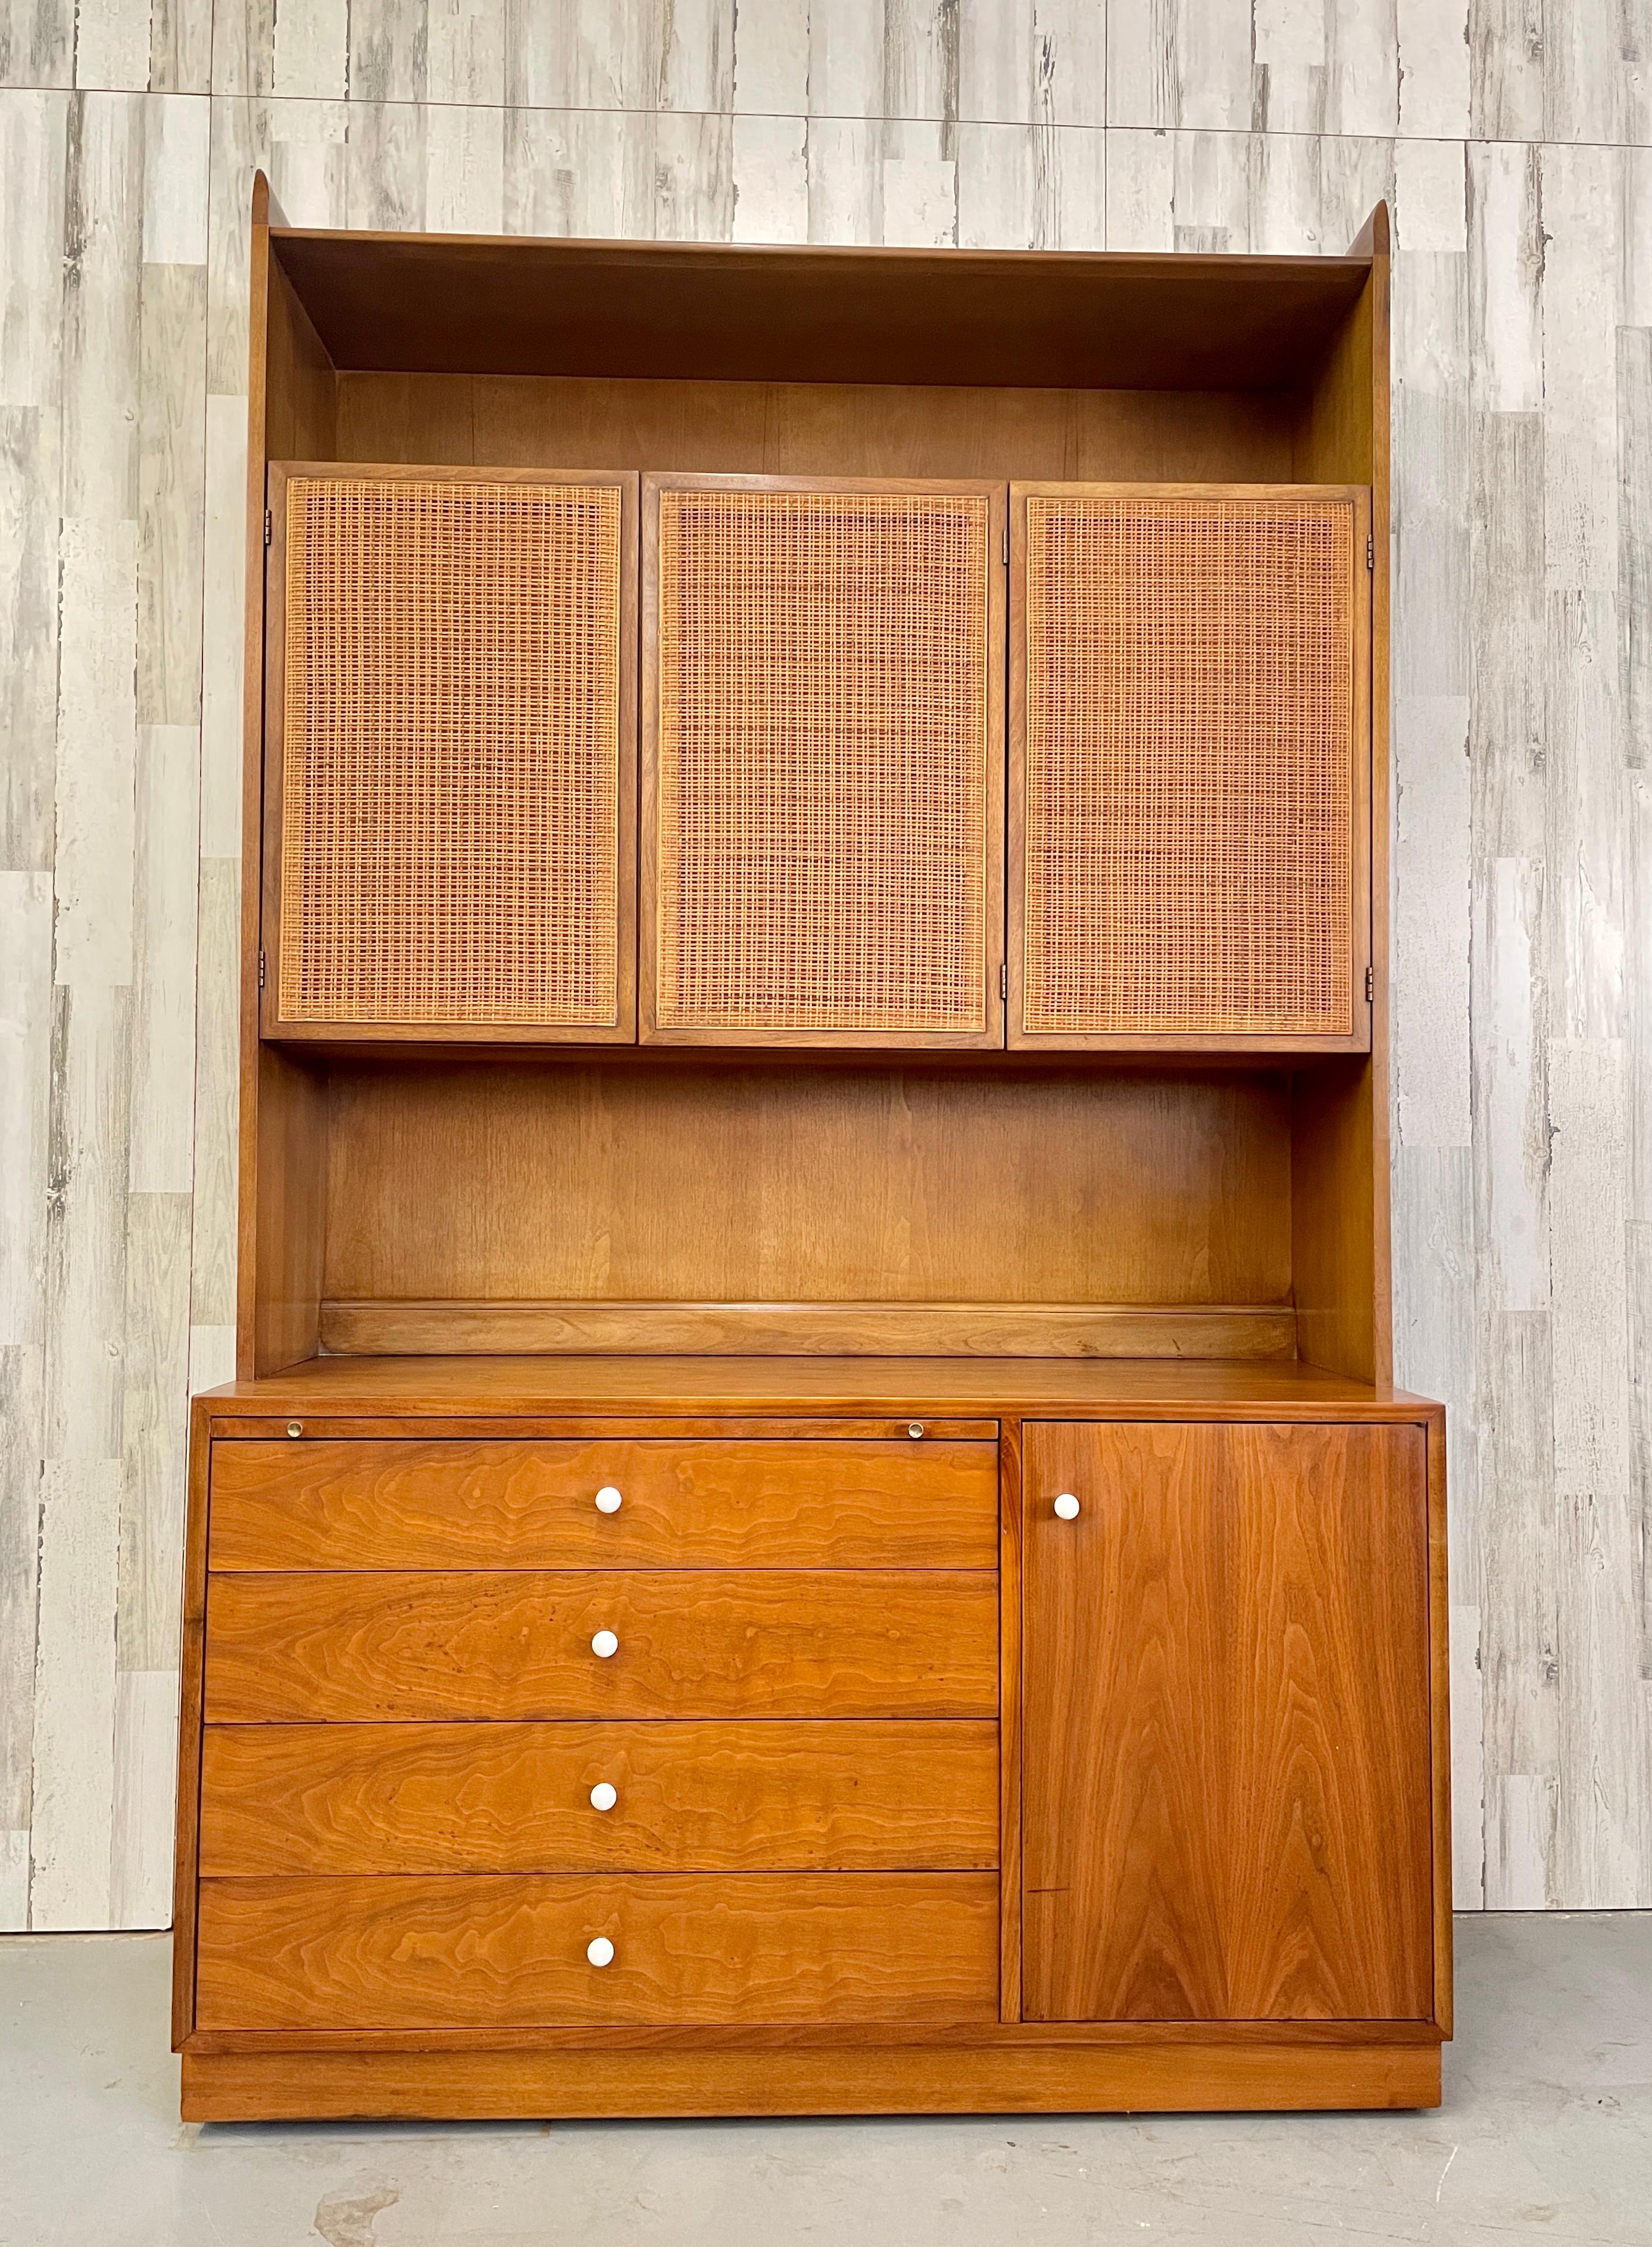 Drexel declaration walnut & cane cabinet designed by Stewart MacDougall and Kipp Stewart. Iconic design with walnut and cane- which is very rare to find. Multiple drawers for storage and hidden pull out top desk. Perfect for small apartments that